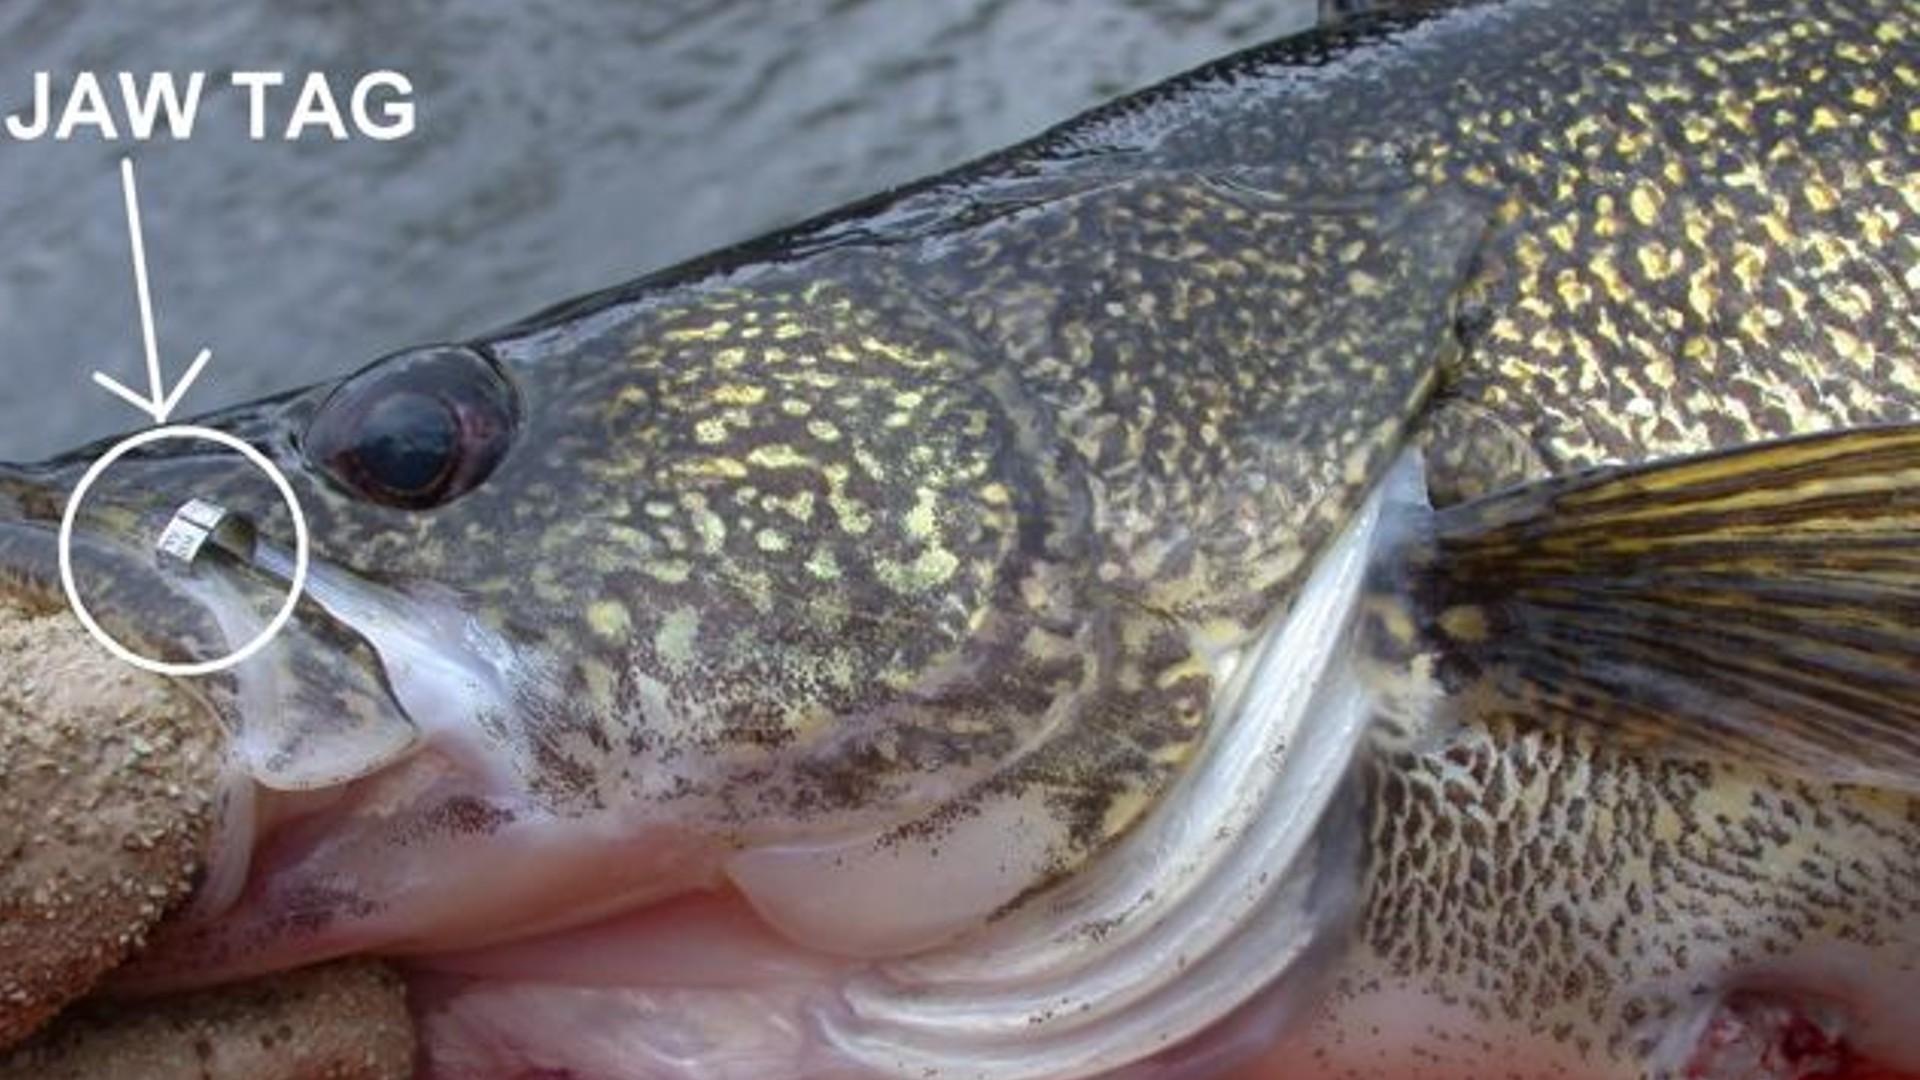 Catch a tagged walleye? Here's how to report it to the Michigan DNR